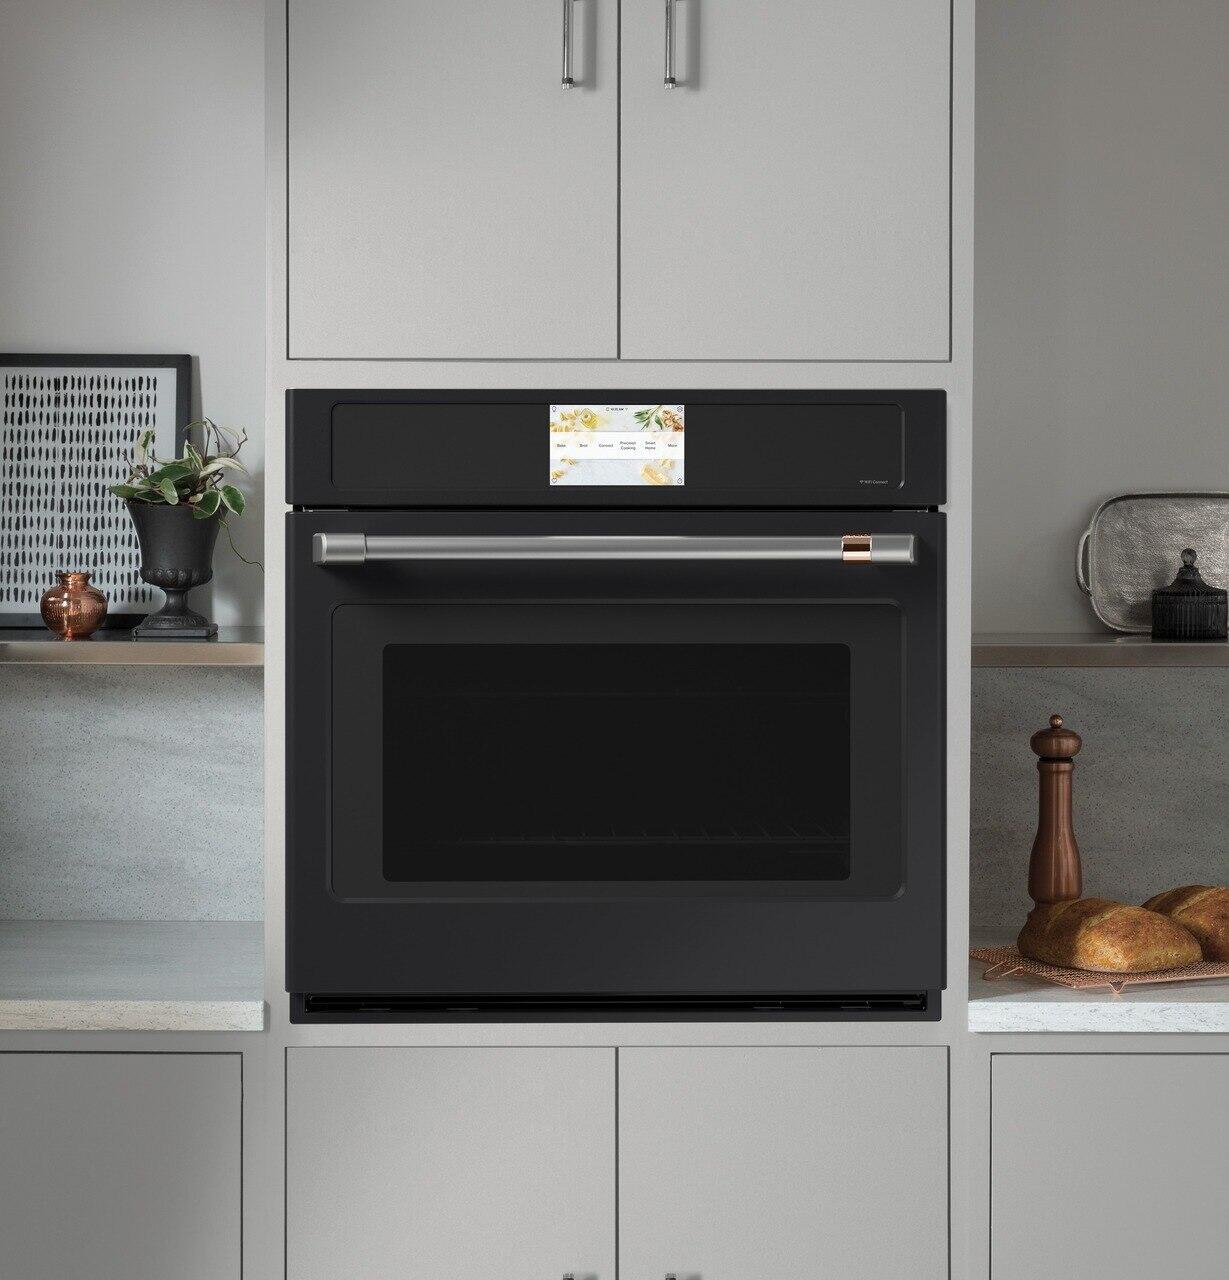 Cafe CTS90DP3ND1 Café&#8482; Professional Series 30" Smart Built-In Convection Single Wall Oven